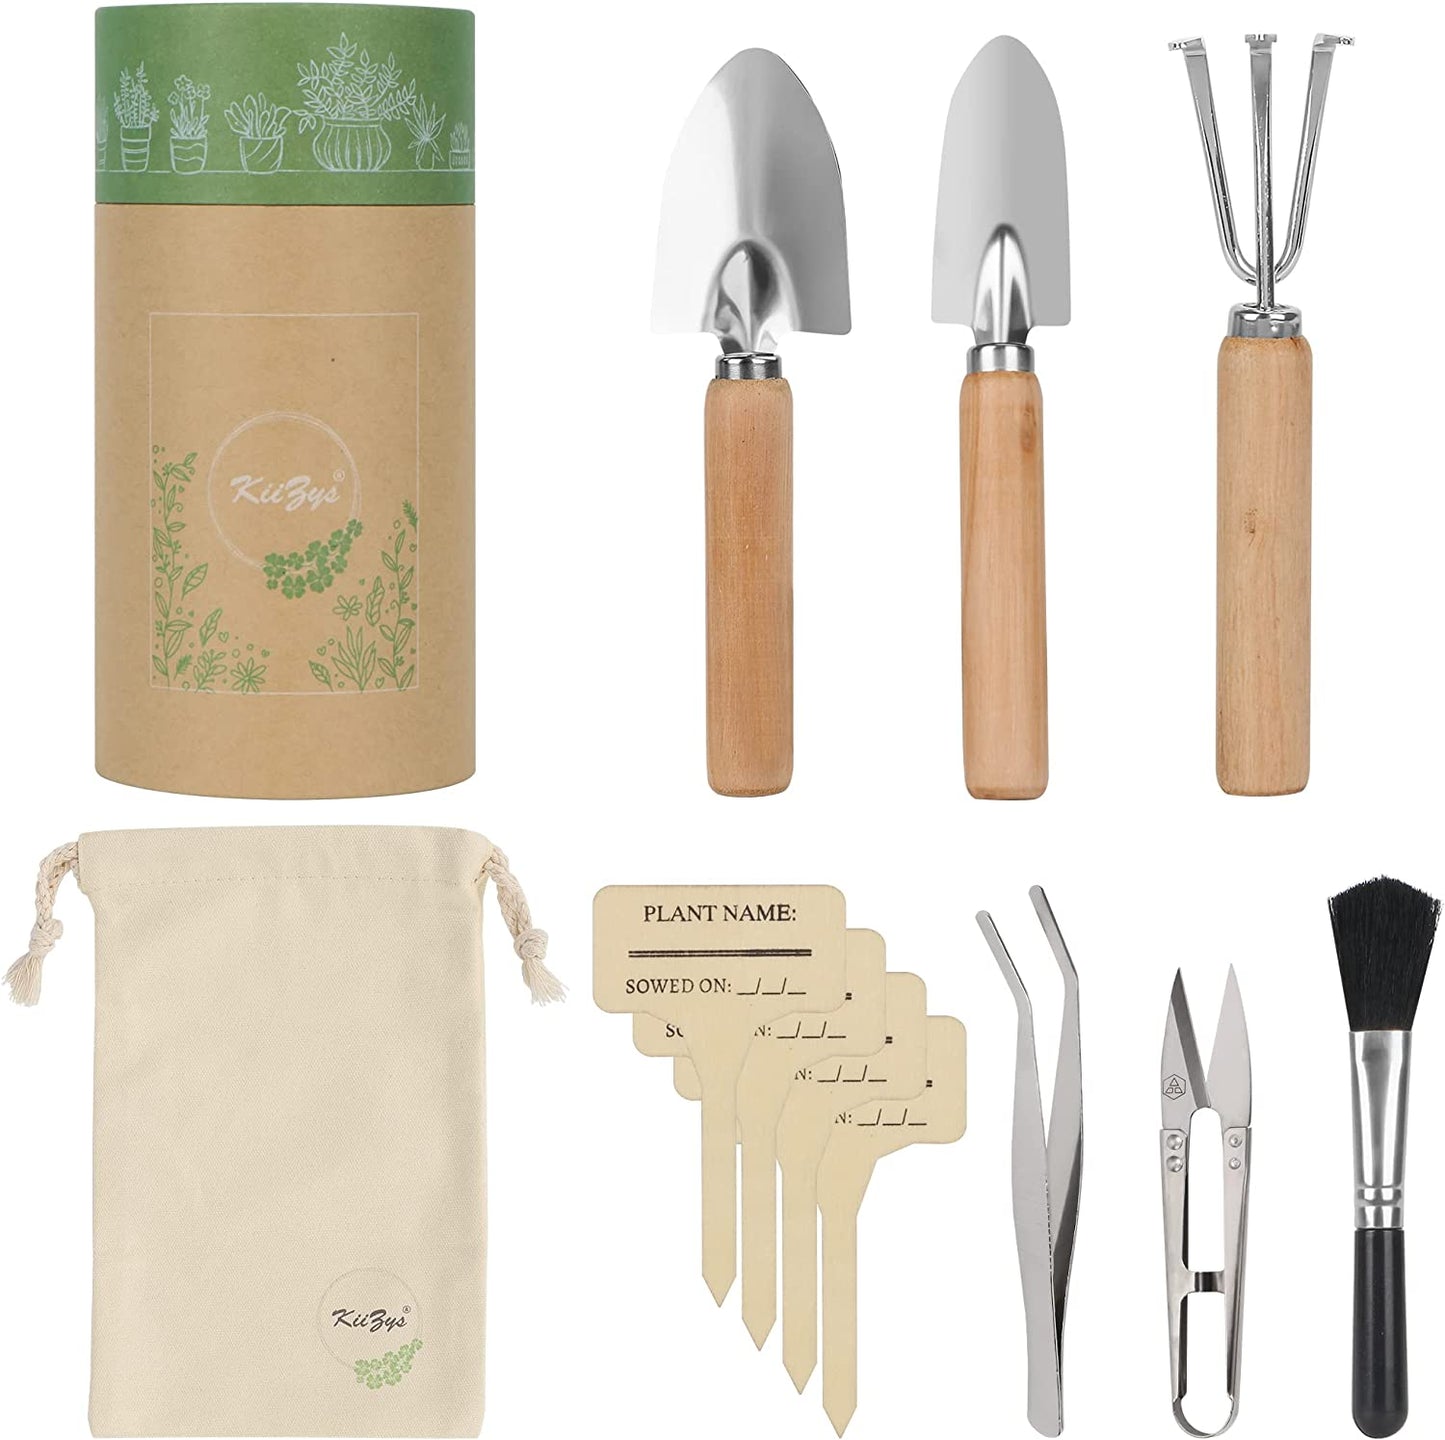 kids gardening set gardening gifts for women indoor garden indoor gardening system wood moisture meter indoor herb garden kids gardening set tiny home kit plant accessories home tool kit tiny house kit to live in for a adult garden supplies succulent small tool kit repotting mat for indoor plants plant lover gifts garden starter kit indoor zen garden kit garden essentials planting tools gardening supplies clearance plant lover gifts for women quirky gifts indoor vegetable garden